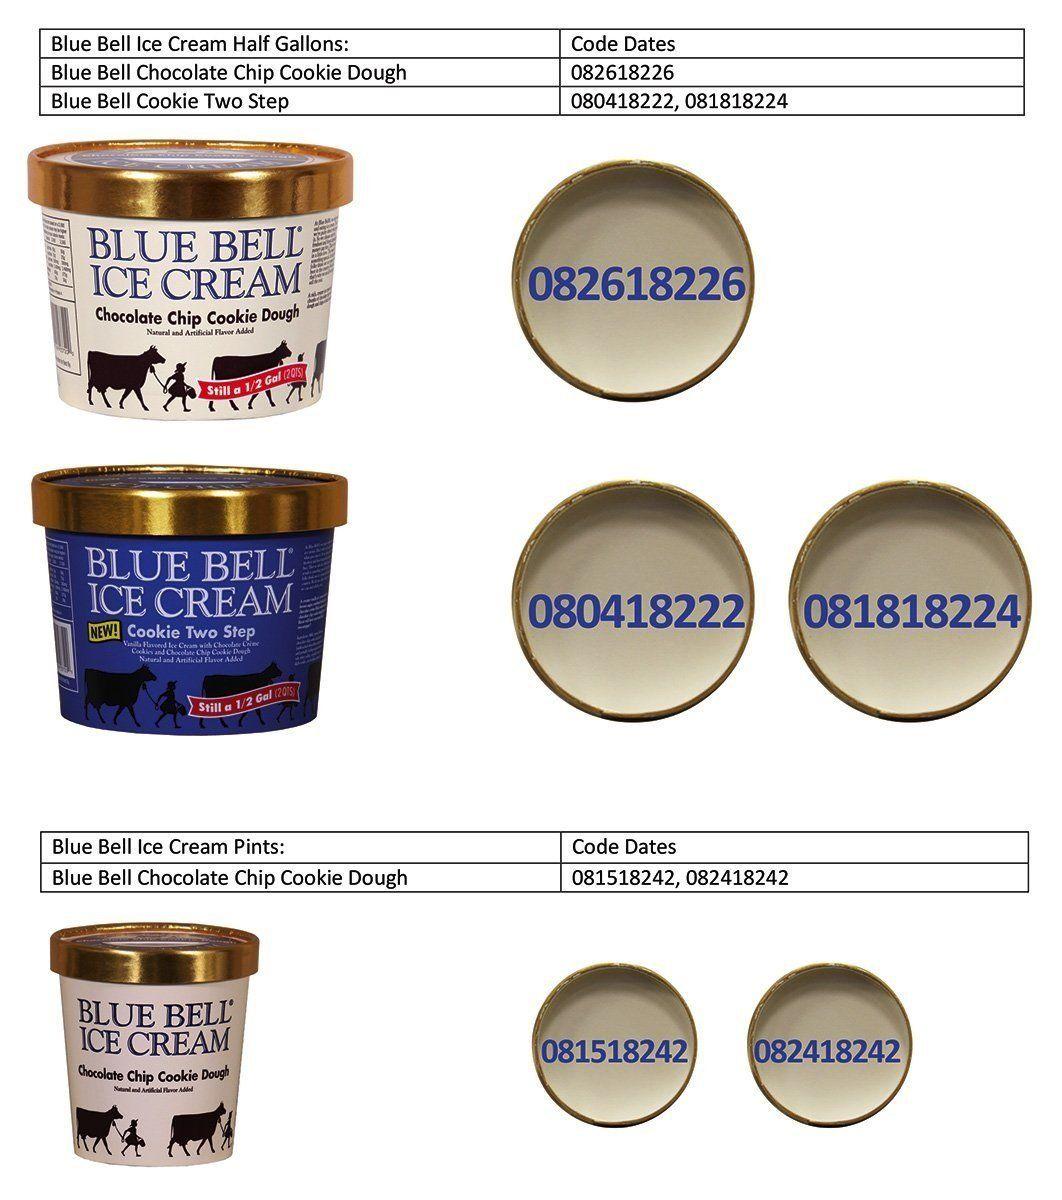 Blue Bell Ice Cream Logo - Blue Bell expands cookie dough-related ice cream recall | WQAD.com